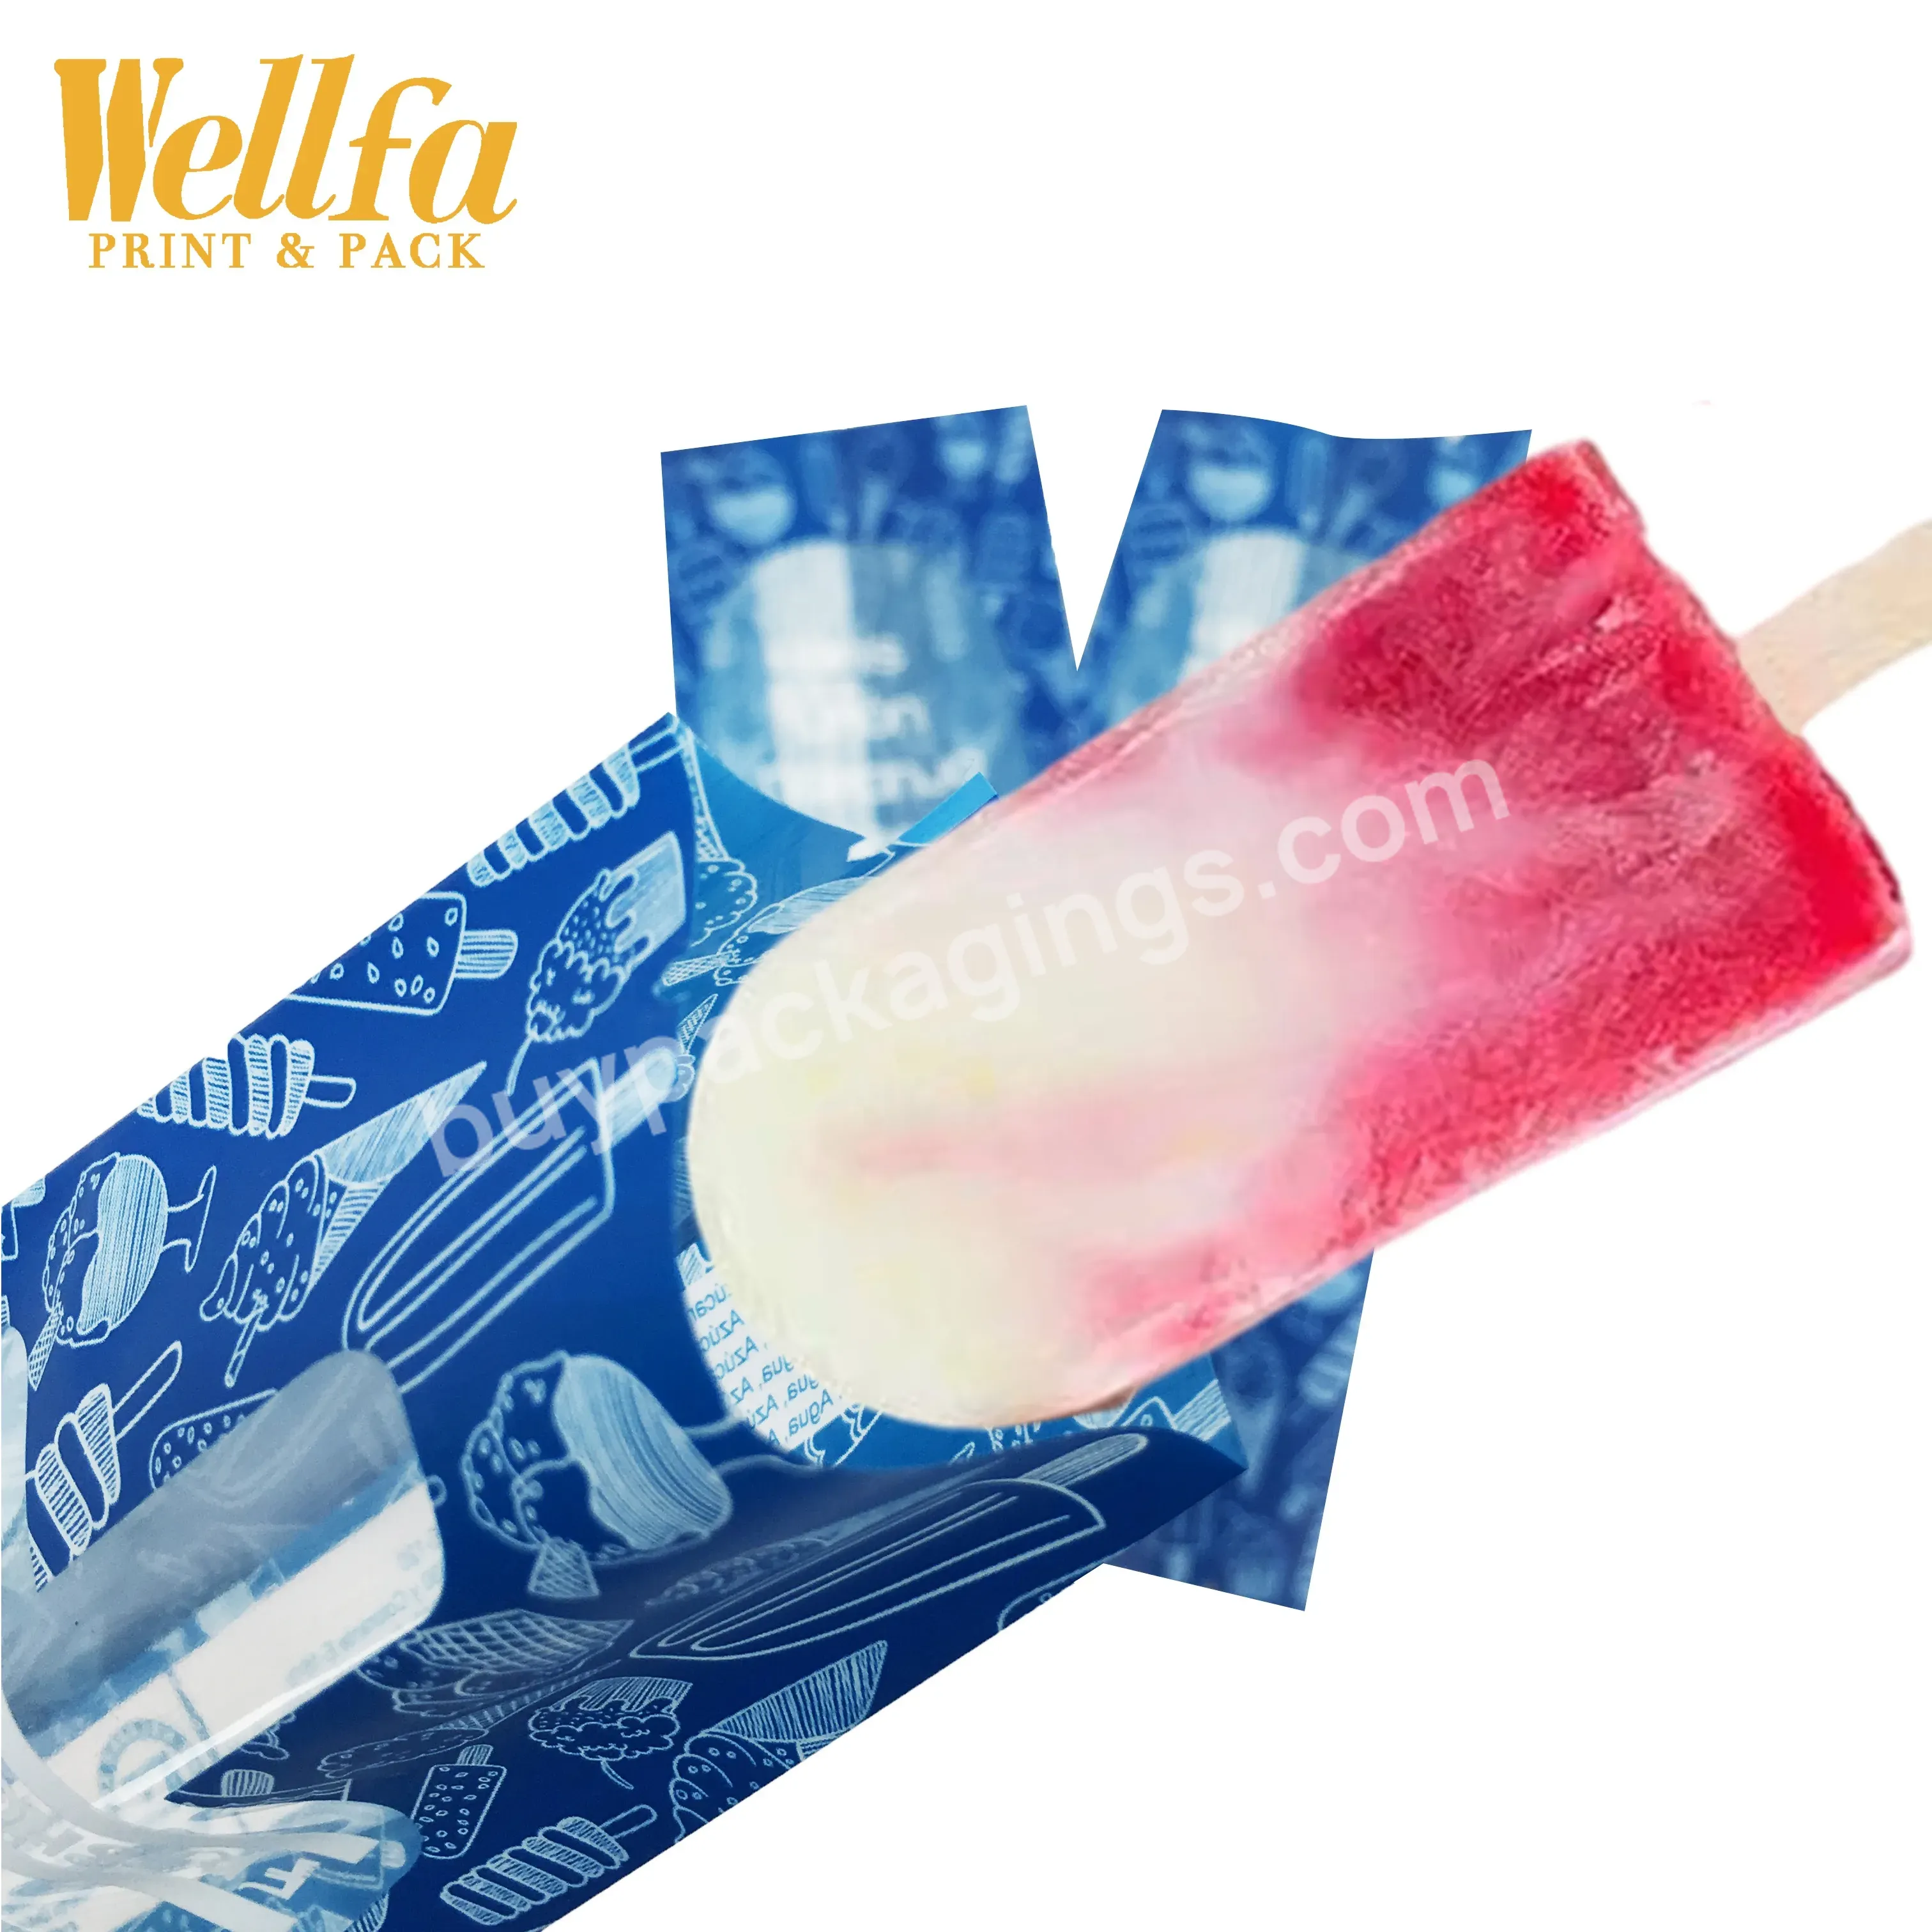 Factory Custom Printed Bolsas Plasticas Dispoz-a-bag Heat Seal Food Grade Sealing Edible Ice Cream Popsicle Packaging Bags - Buy Ice Cream Popsicle Packaging Bags Custom Printed Bolsas Plasticas,Transparent Clear Fin Seal Heat Sealable Plastic Frozen